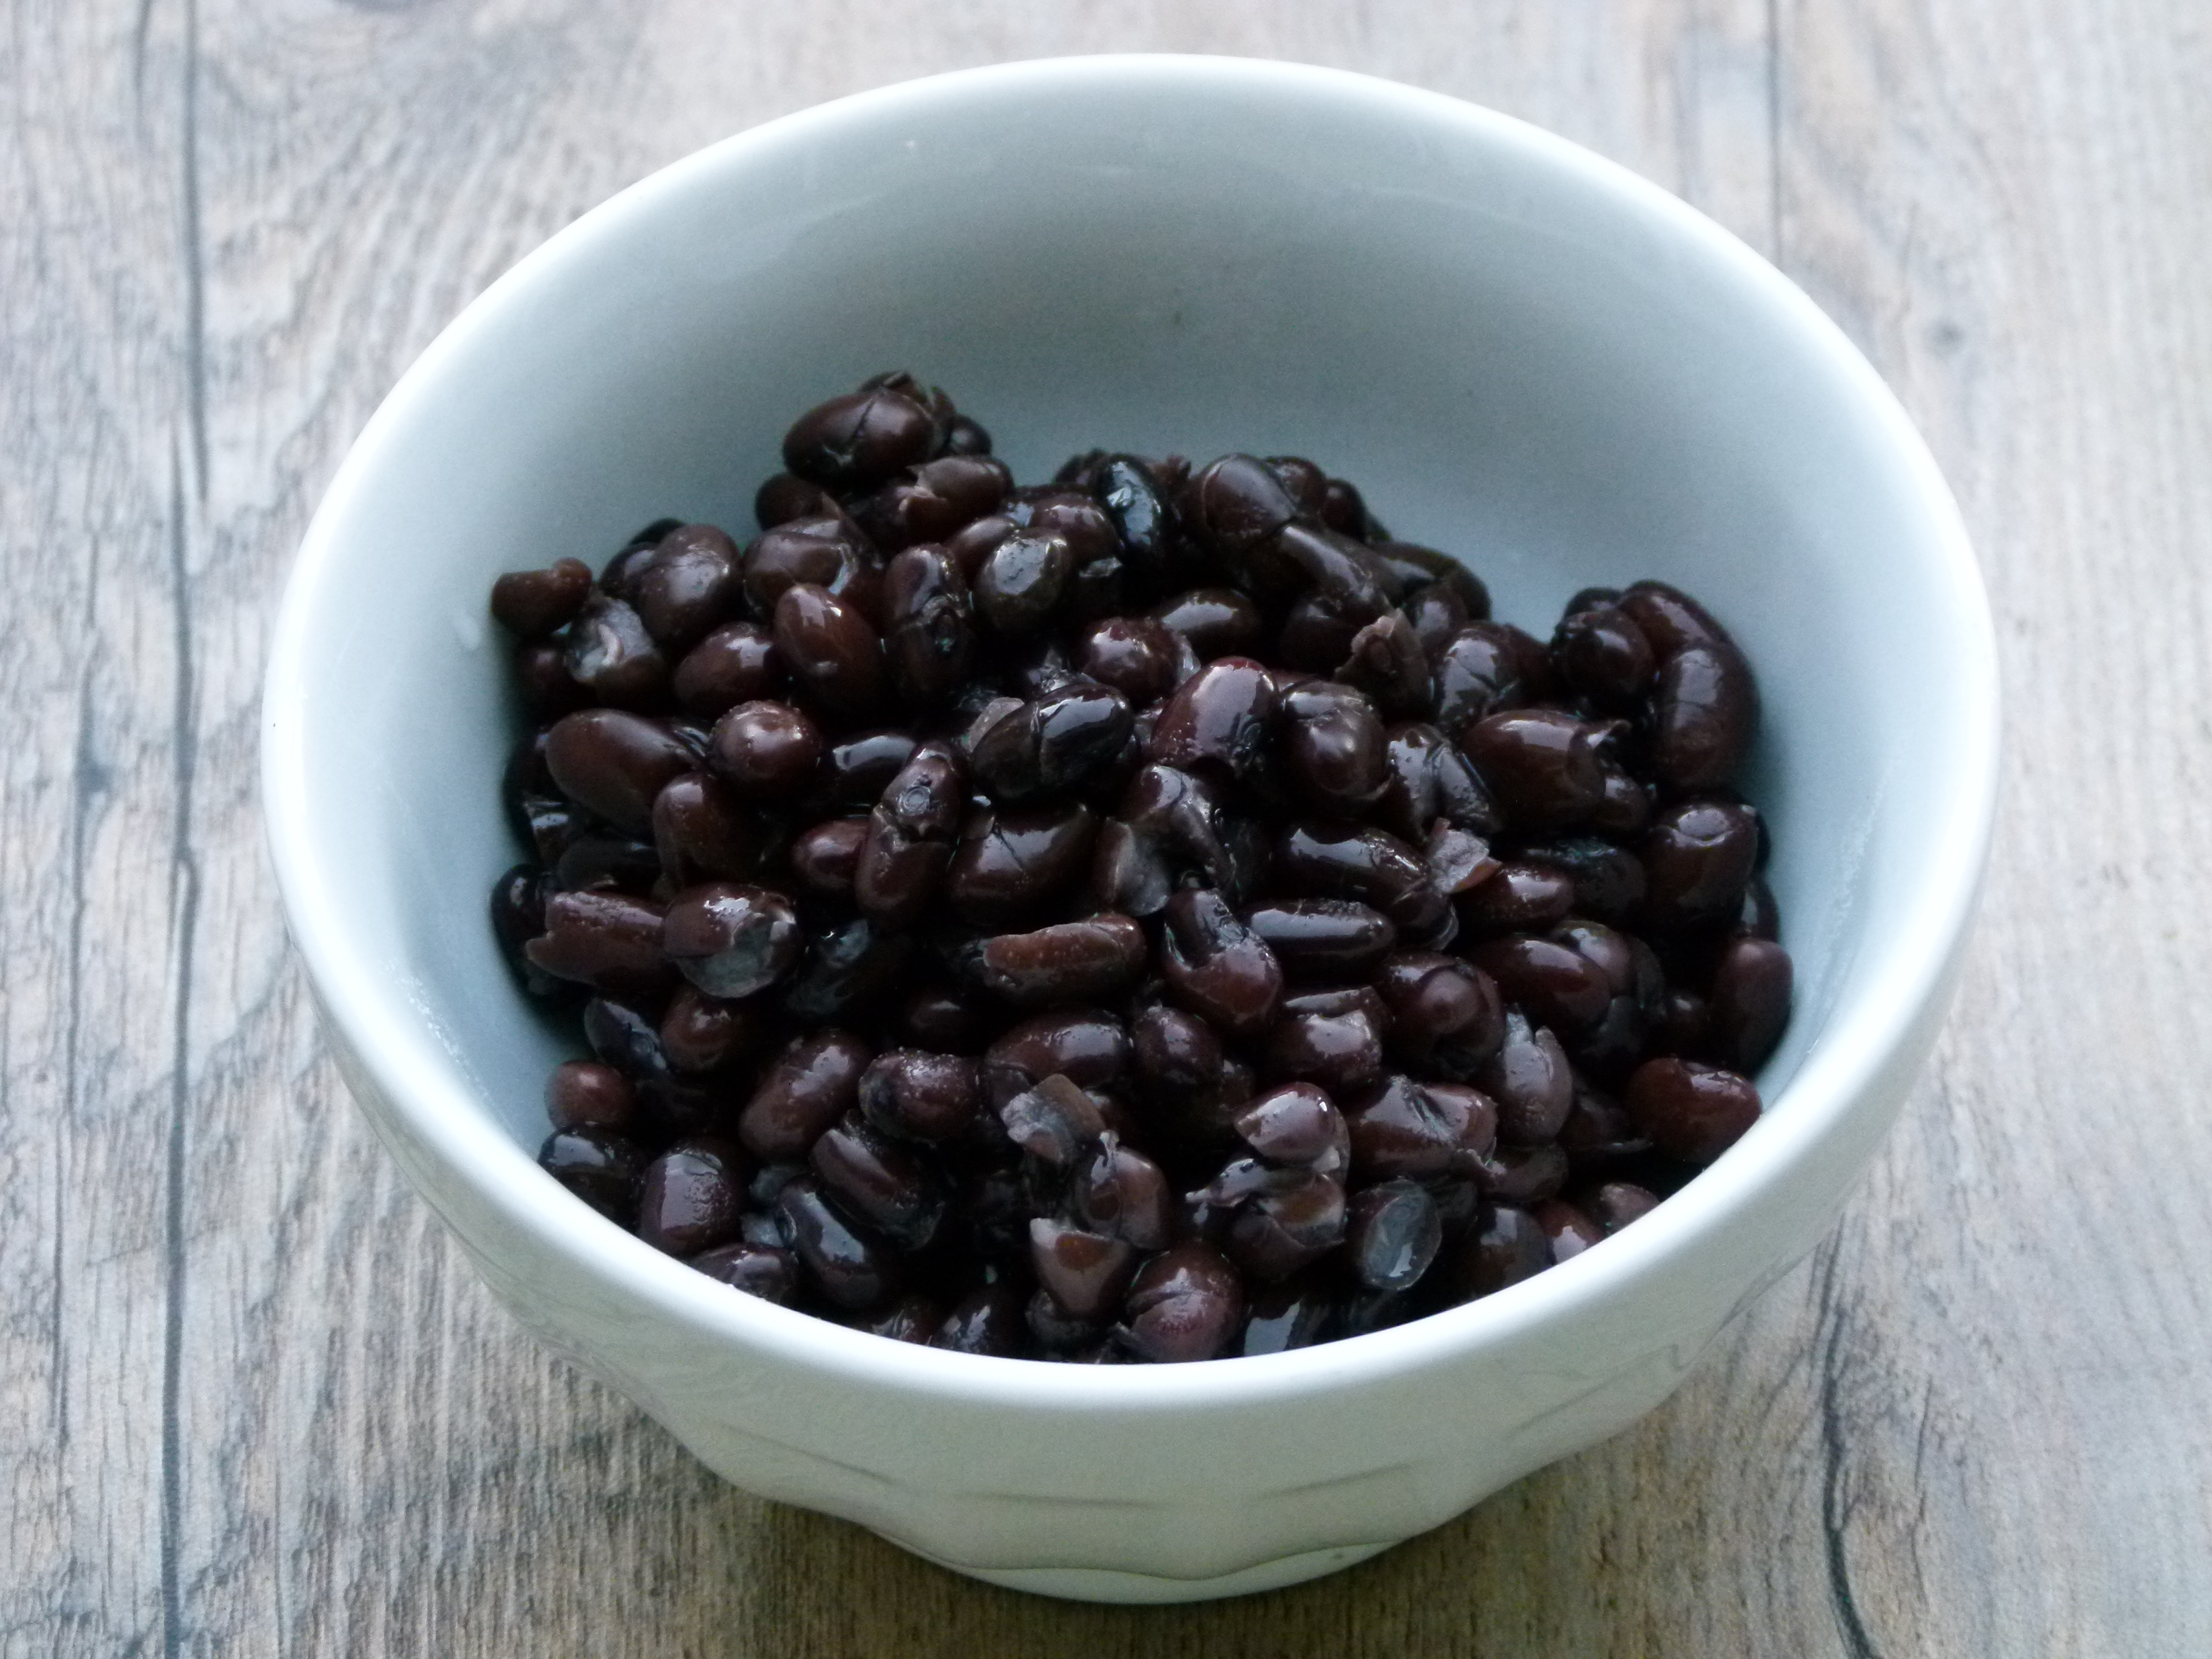 How to cook beans from scratch